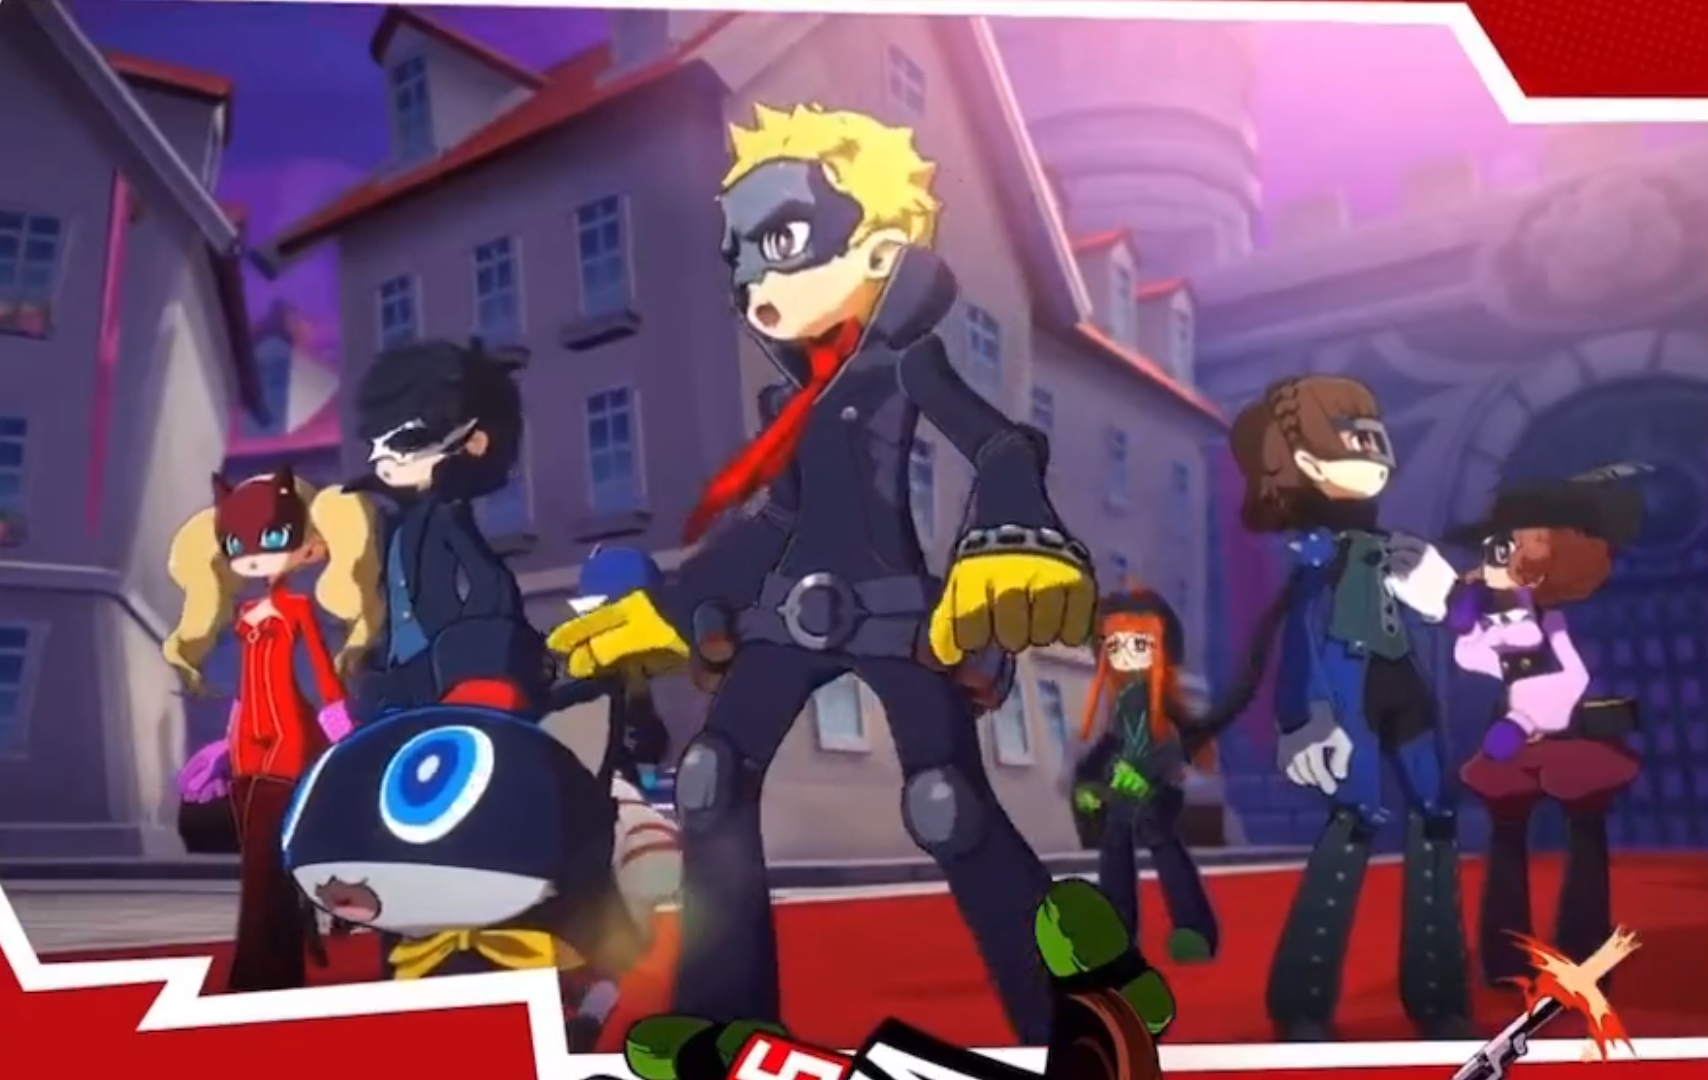 A leaked Persona 5 Tactica trailer from Atlus West shows the Phantom Thieves aghast at a world they don't recognize via Twitter